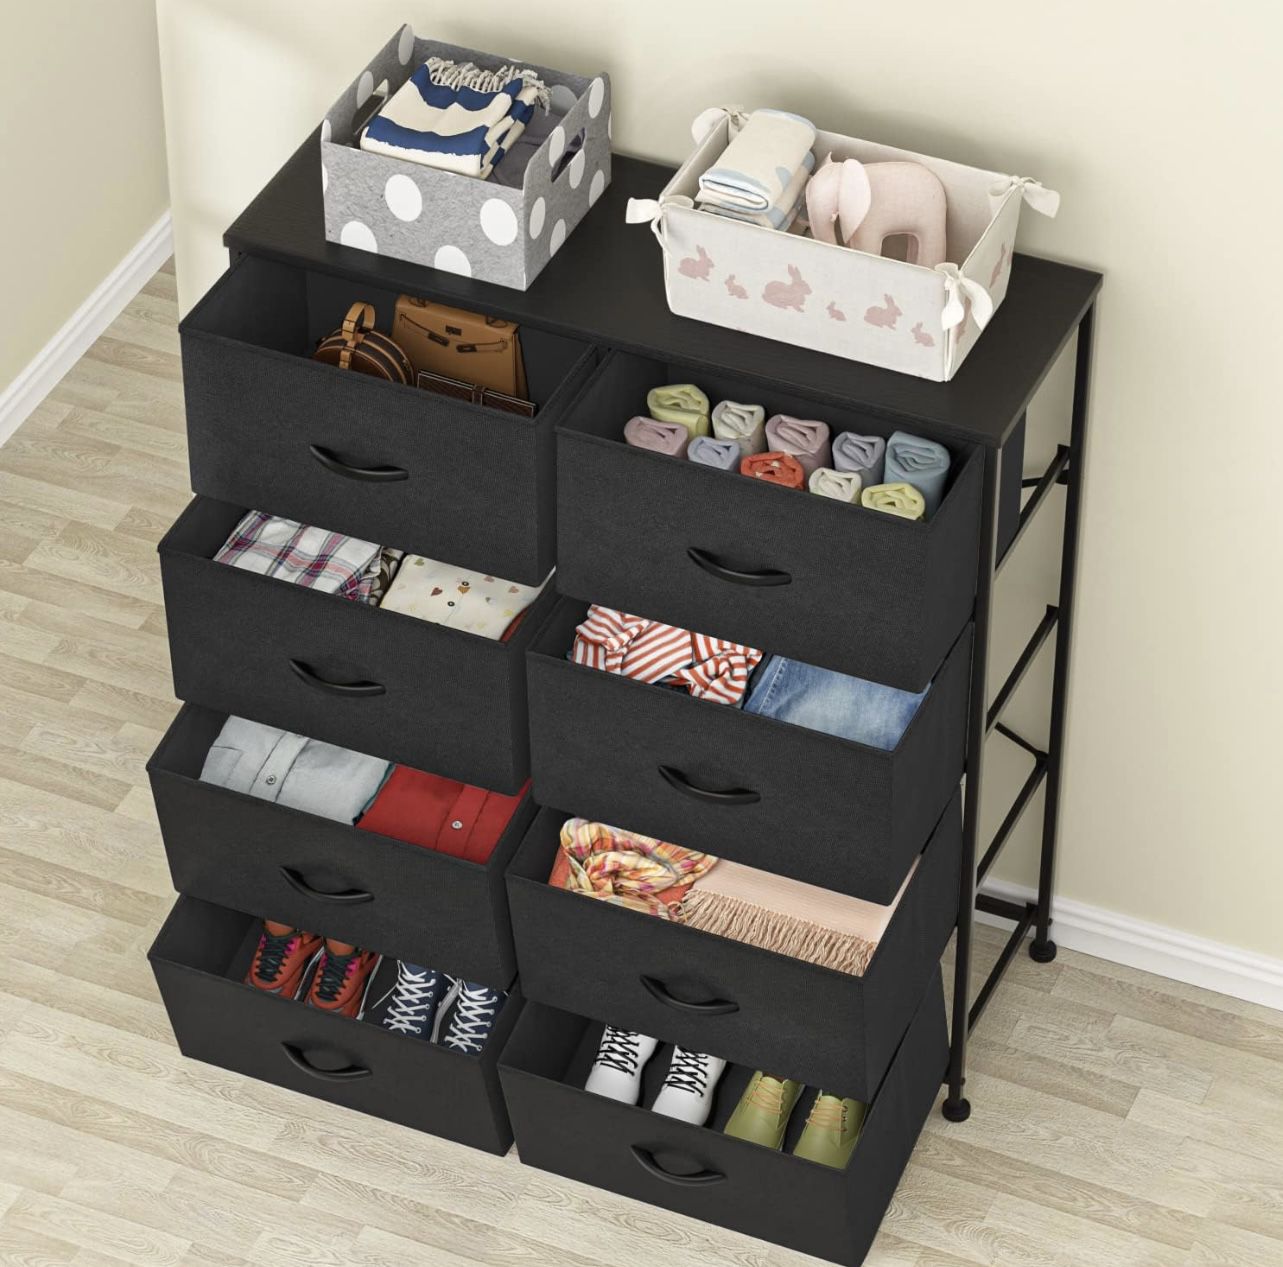 Dresser for Bedroom with 8 Drawers, Wide Chest of Drawers, Fabric Closet Dresser, Clothing Storage Organizer Unit with Fabric Bins, for Closet, TV Sta